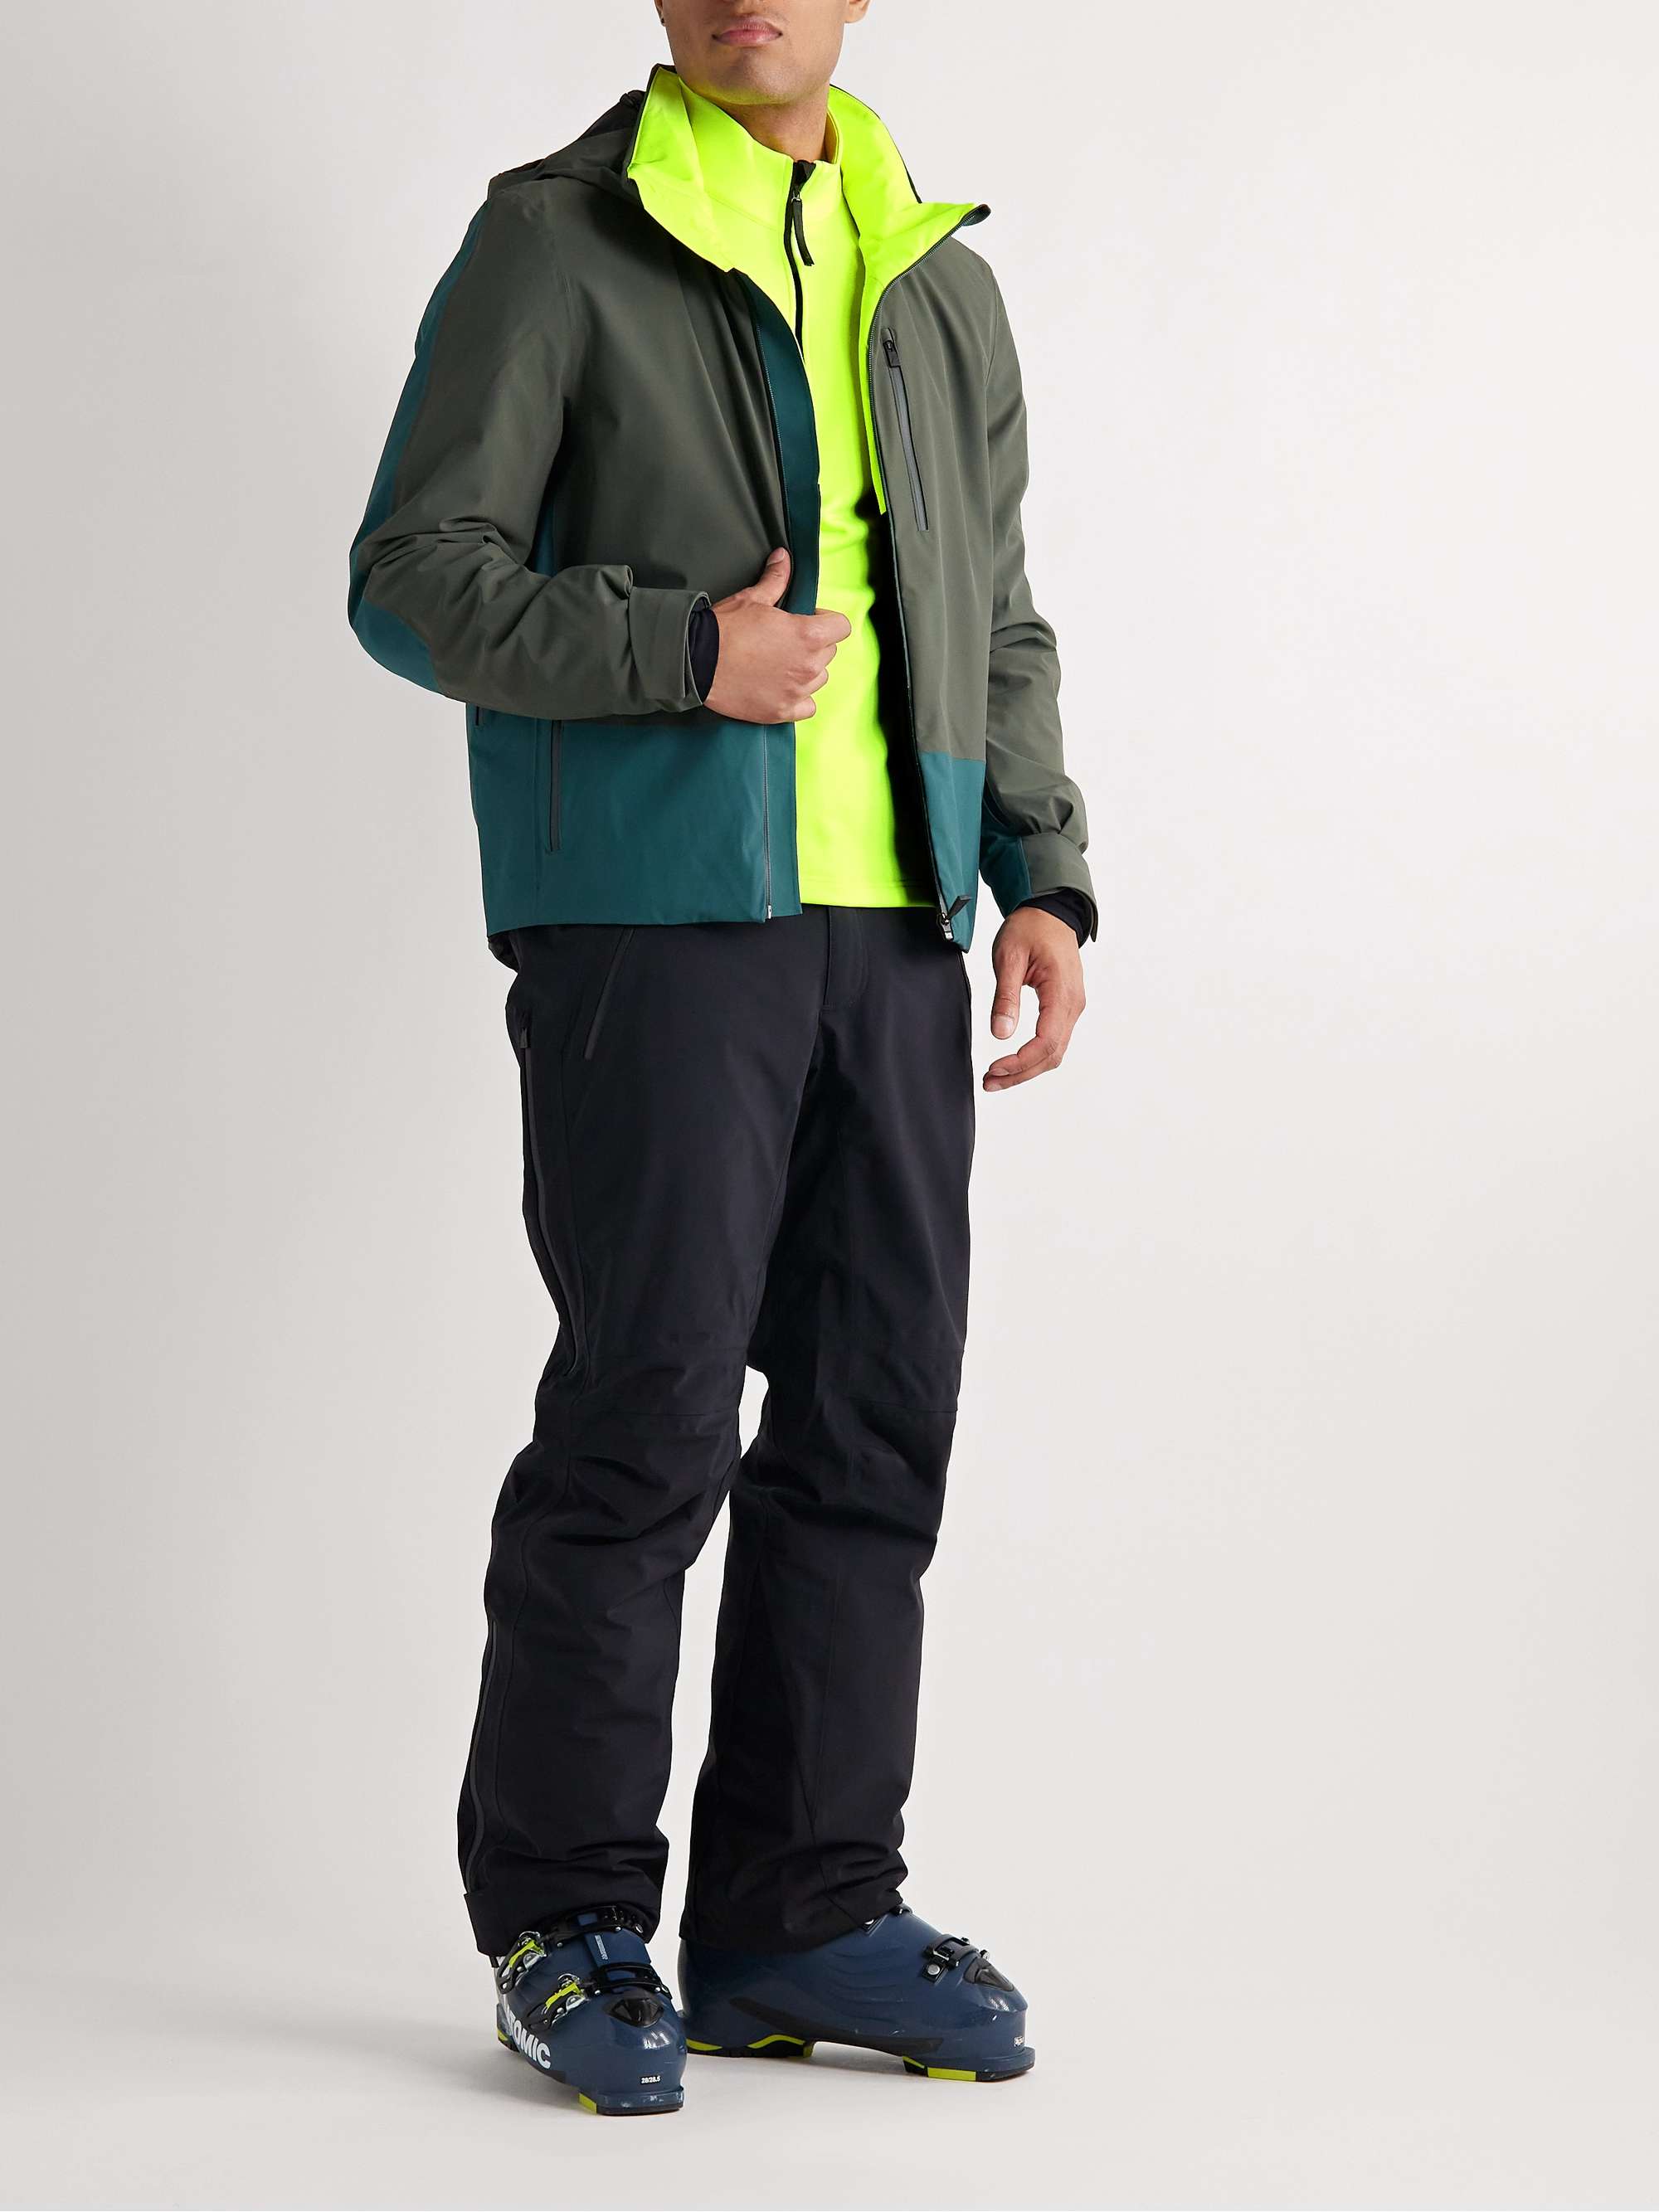 AZTECH MOUNTAIN Slim-Fit Stretch-Jersey and Ripstop Half-Zip Ski Base Layer